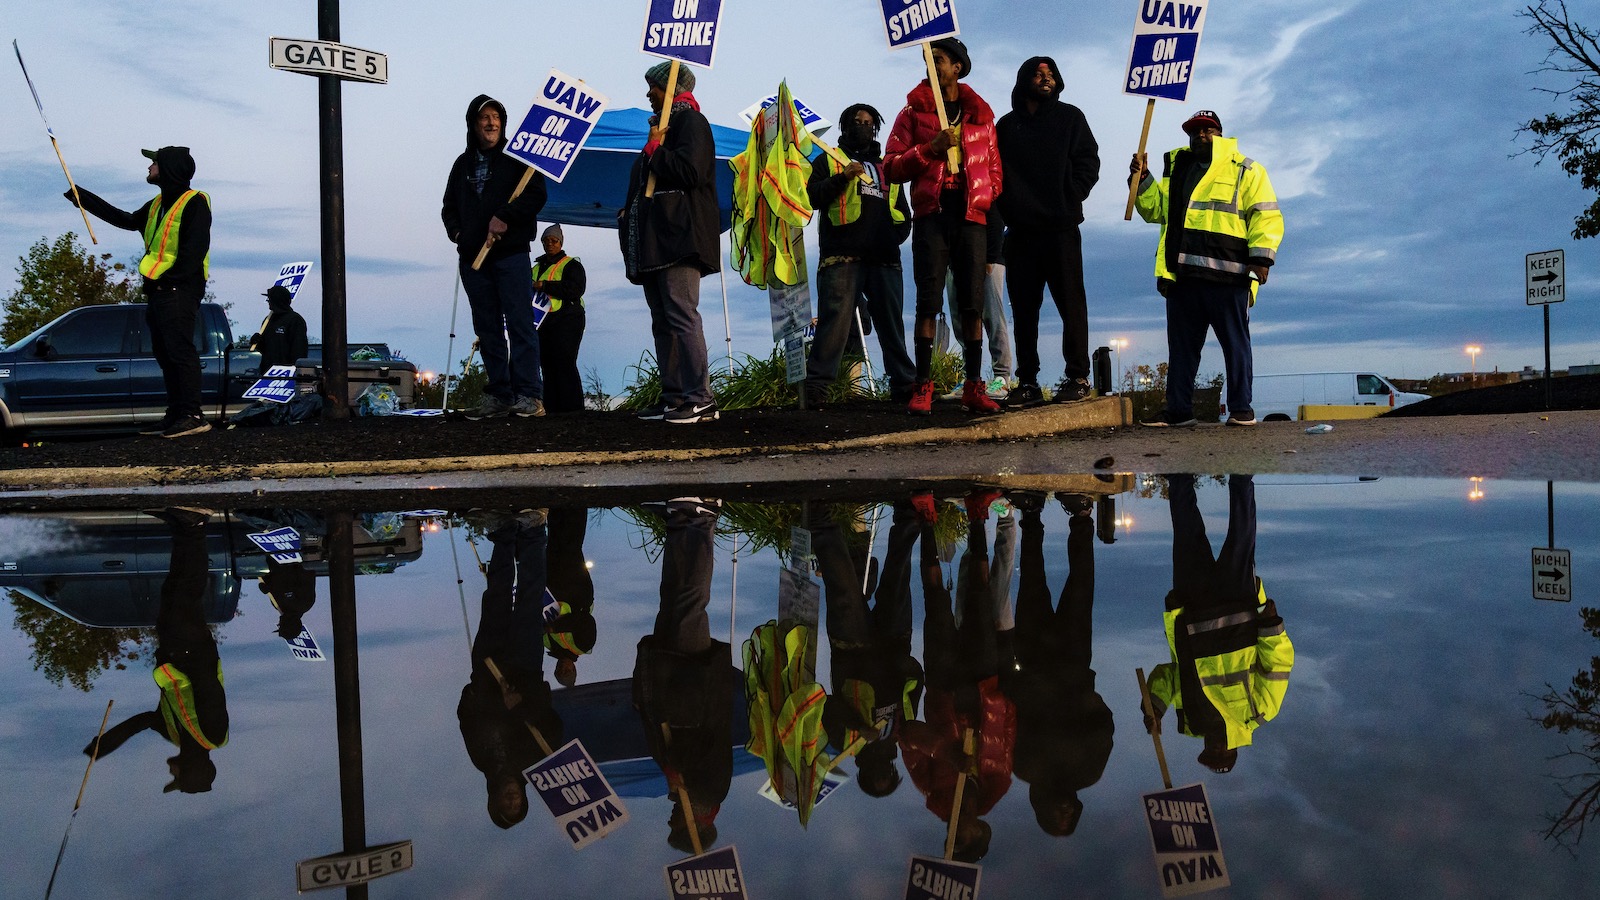 Factory workers and members of the United Auto Workers waving pickets outside a factory in Louiseville, Kentucky, are reflected in a puddle.